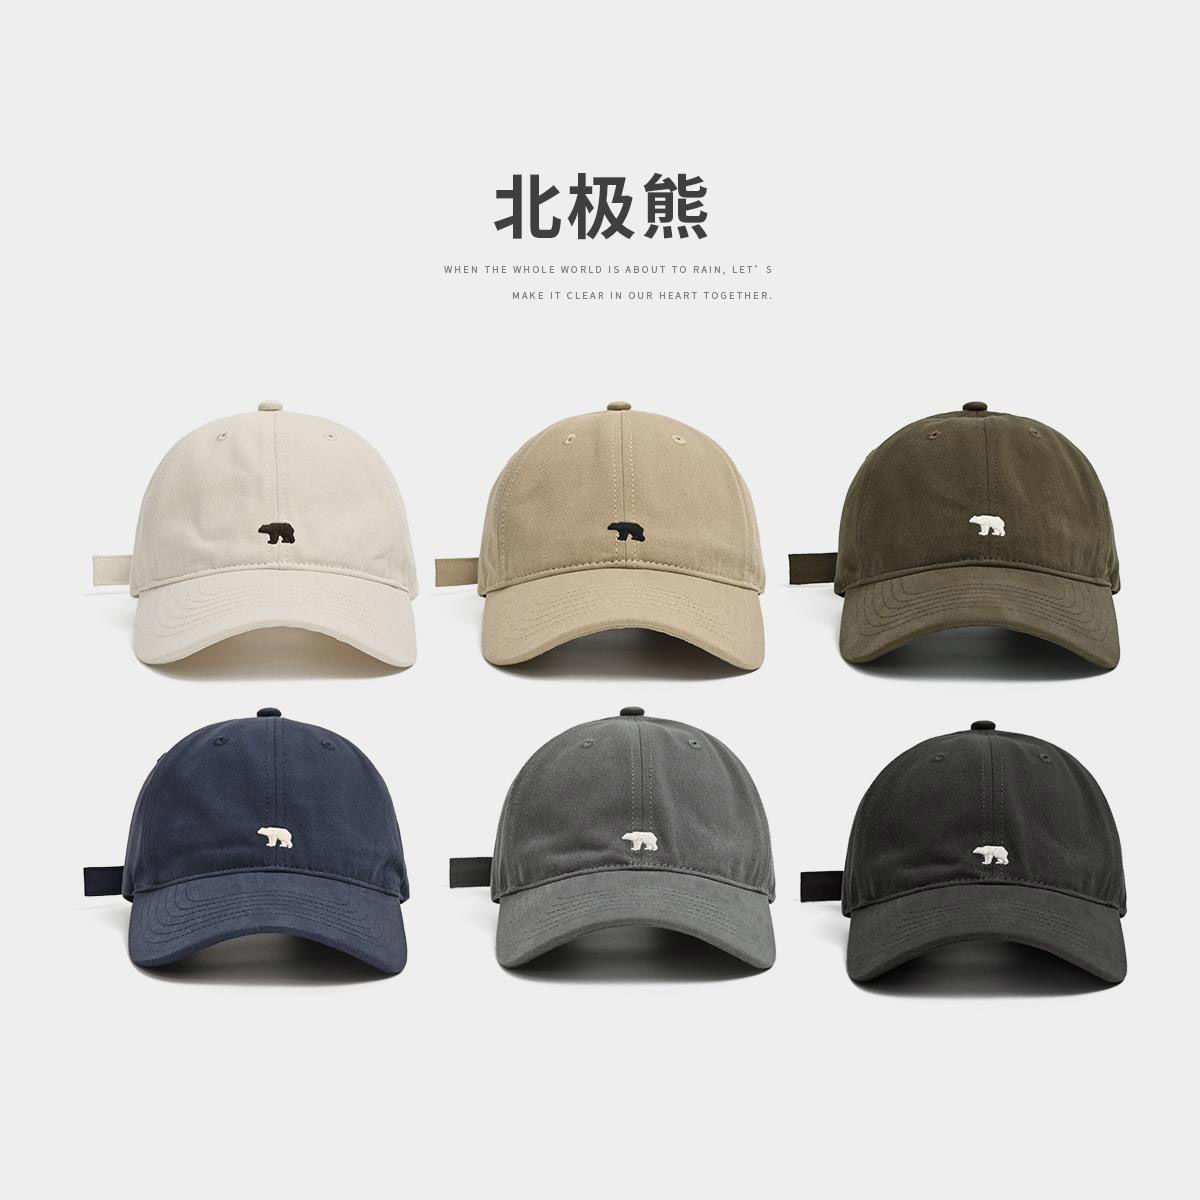 American brushed gray embroidered baseball cap women's sunshade soft top polar bear peaked hat men's style with a small face